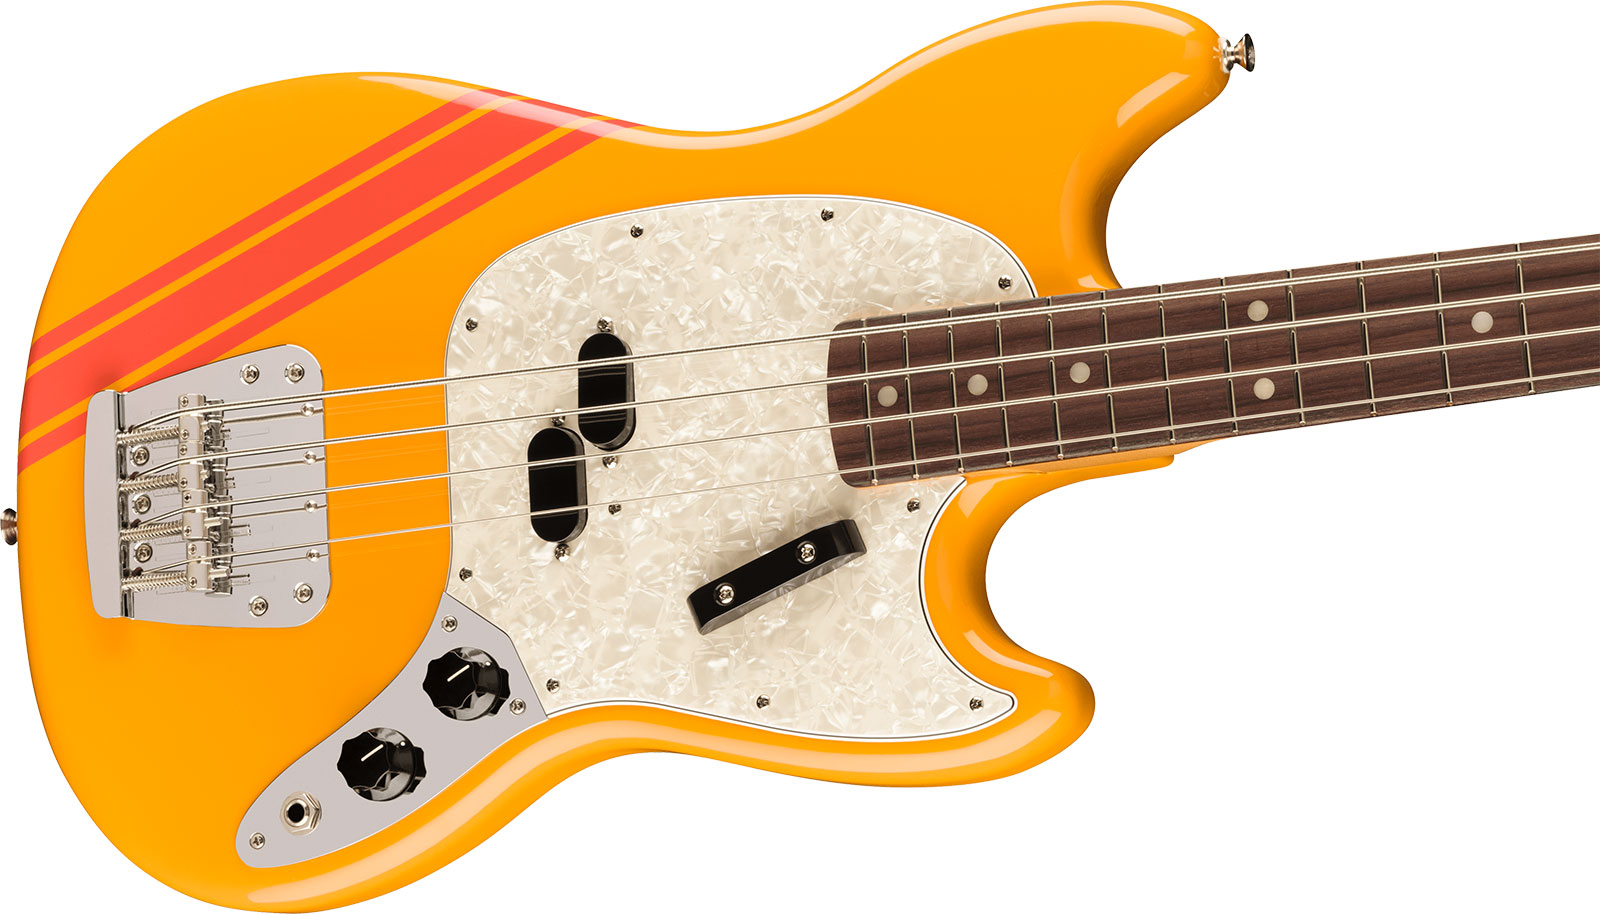 Fender Mustang Bass 70s Competition Vintera 2 Rw - Competition Orange - Solidbody E-bass - Variation 2